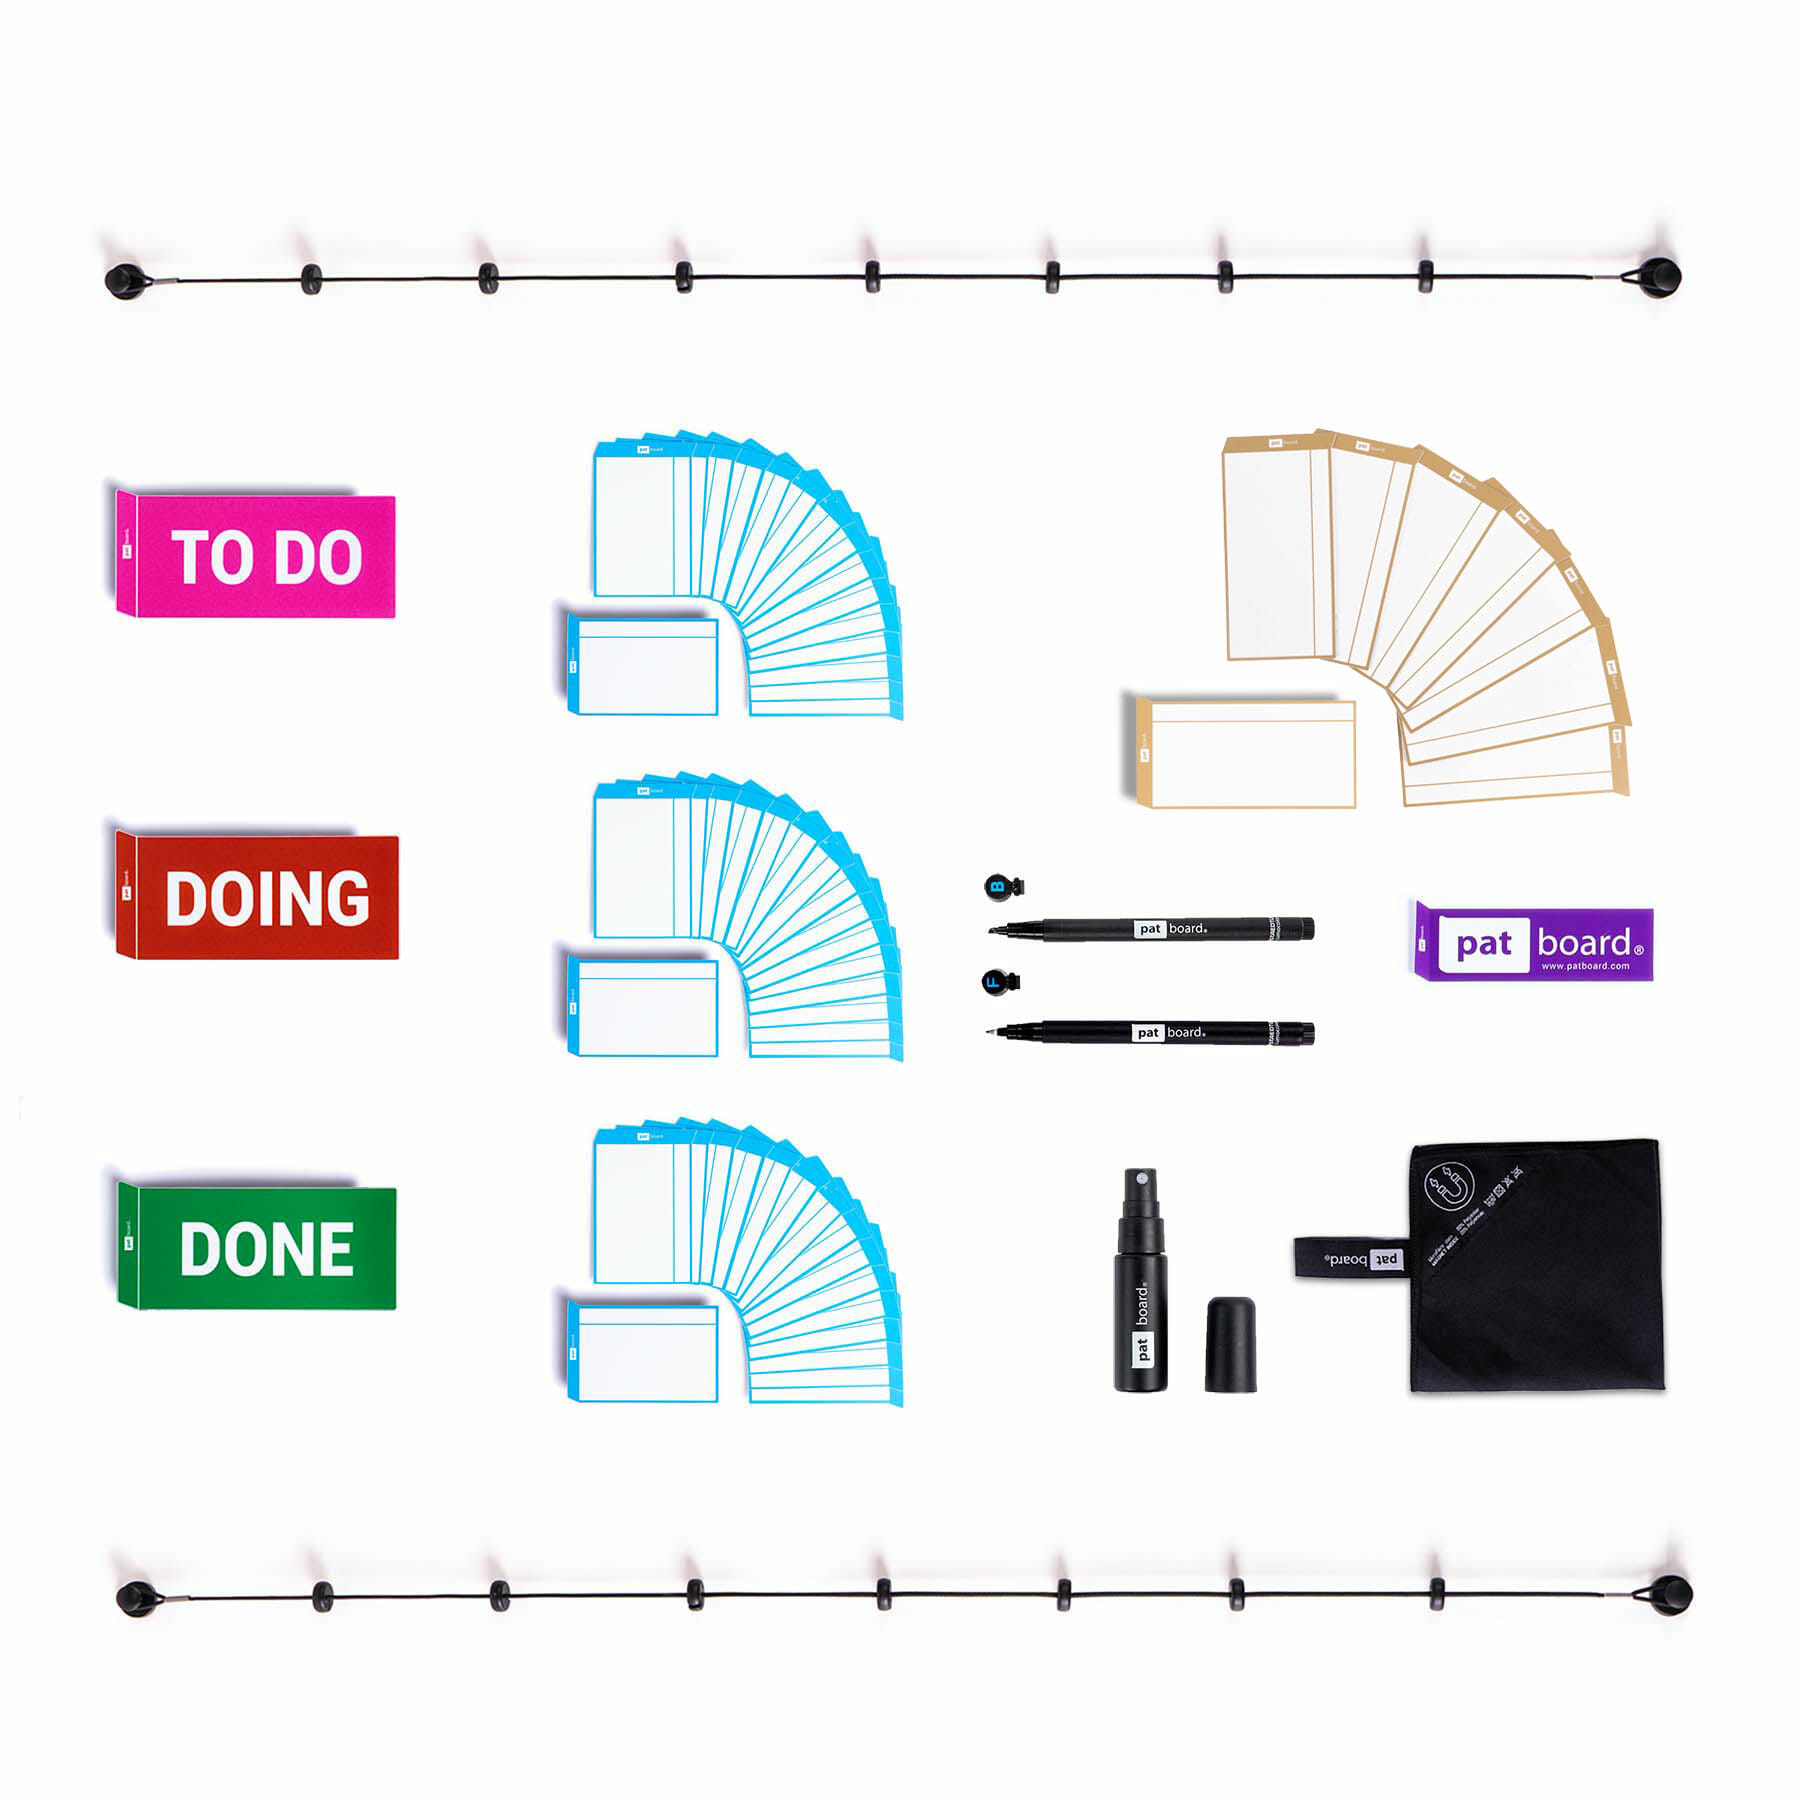 PATboard home tool set for your scrum board Scrum kanban board magnets 